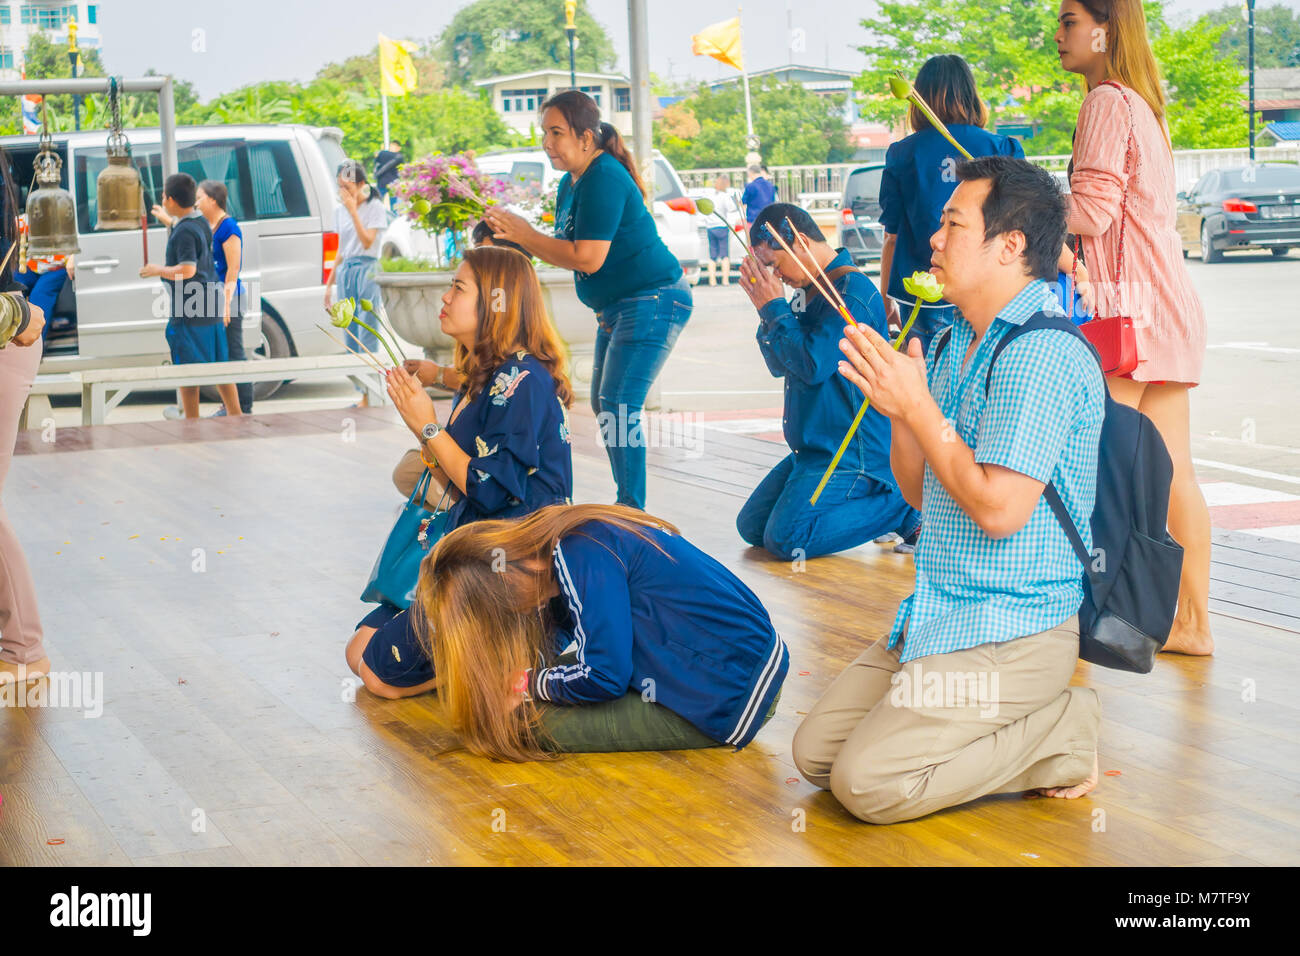 AYUTTHAYA, THAILAND, FEBRUARY, 08, 2018: Outdoor view of unidentified people praying on their knees inside of a temple at Wat Lokayasutharam in Ayutthaya Stock Photo